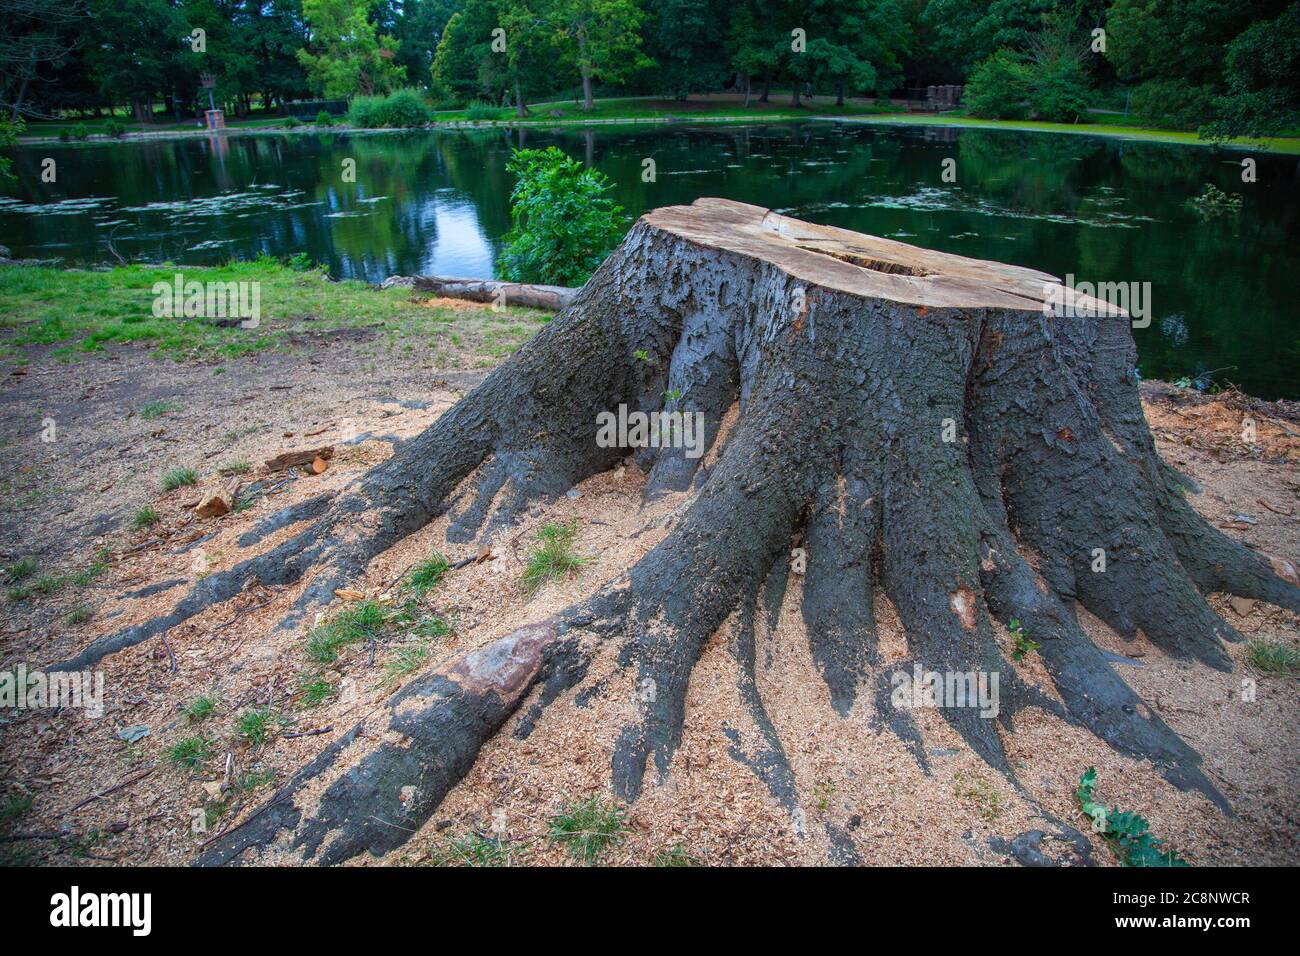 Felled beech tree, trees, Dismantle Copper Beech, mature beech trees, high winds and storms, magnificent trees, unsafe felled, rotten fungal infection. Stock Photo